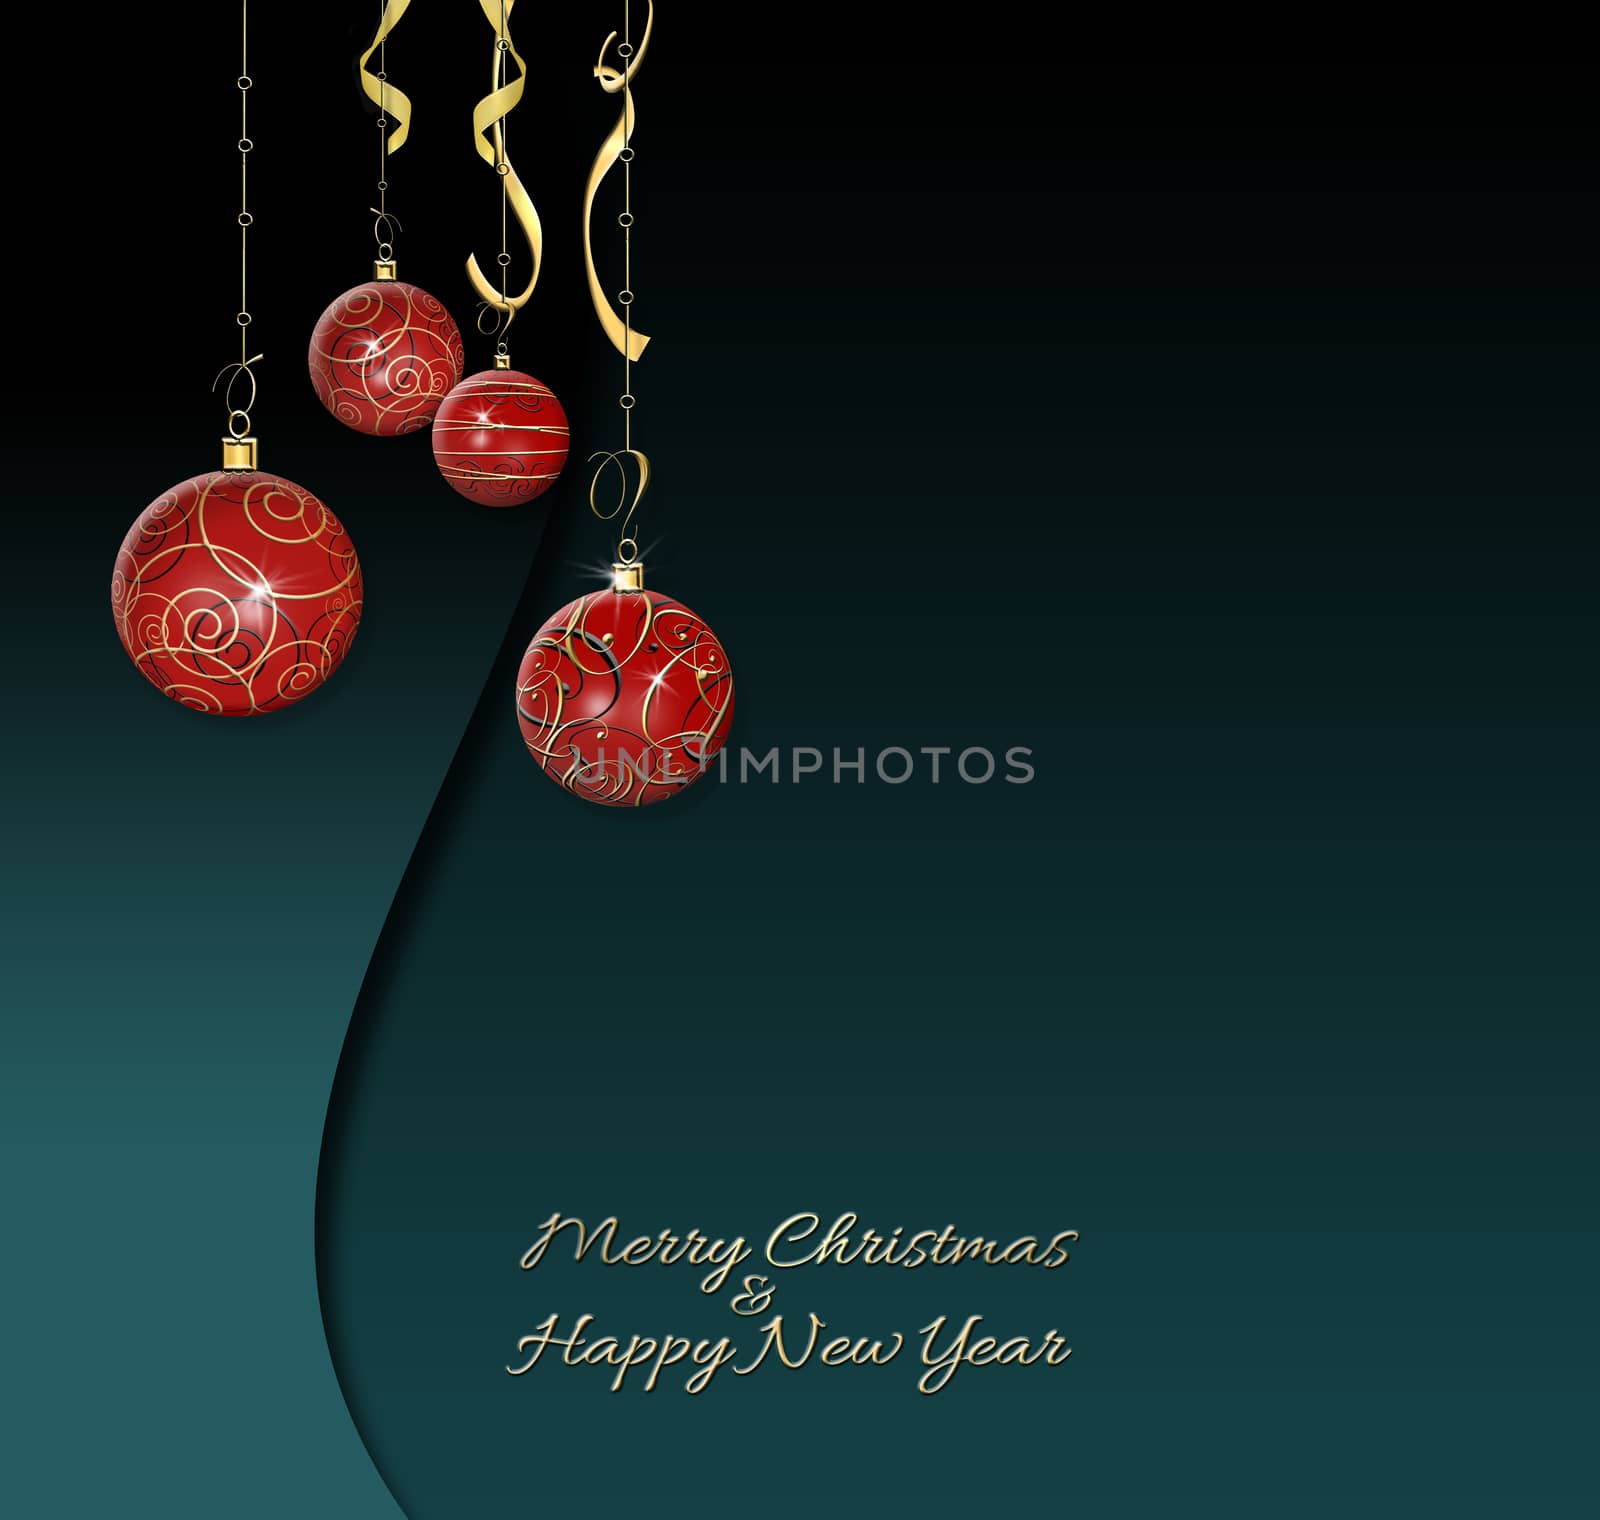 Elegant Christmas background with hanging red baubles on dark background by NelliPolk